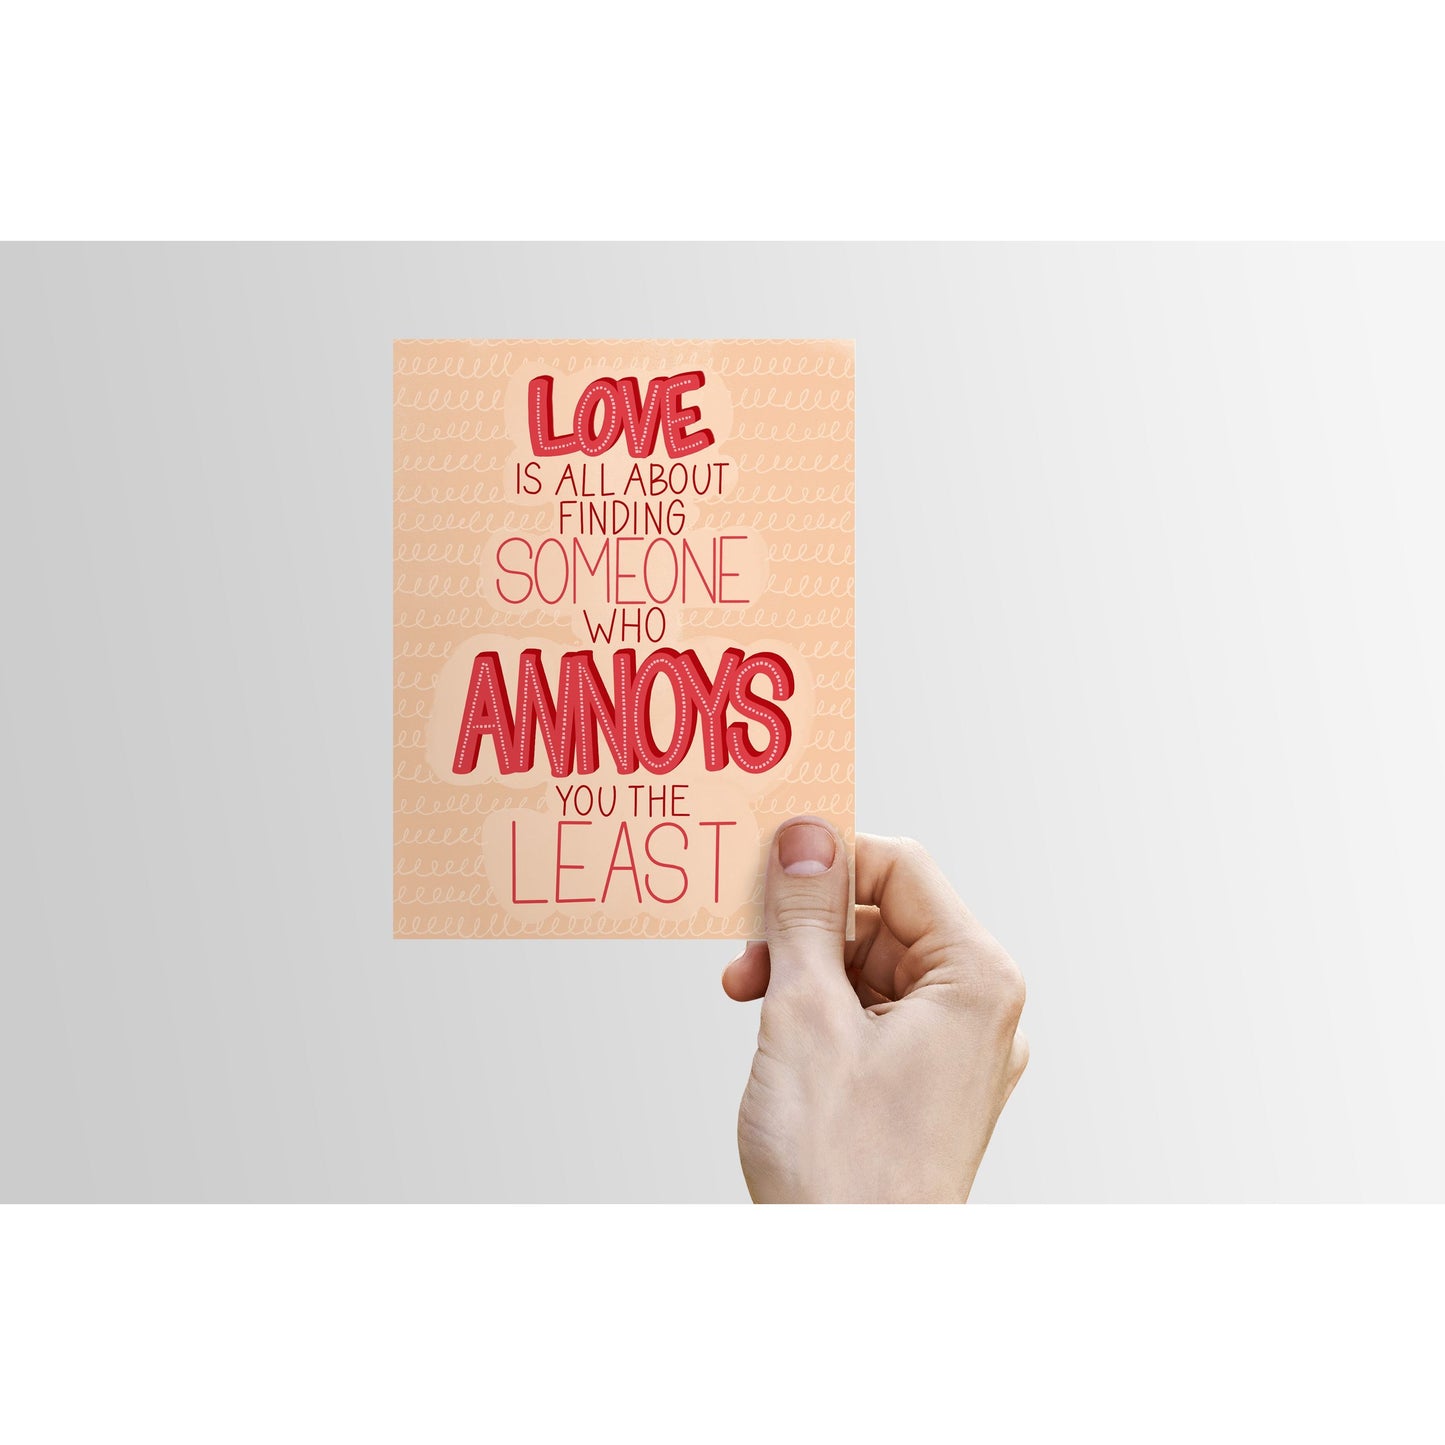 Love Is All About Finding Someone Who Annoys You the Least - Greeting Card